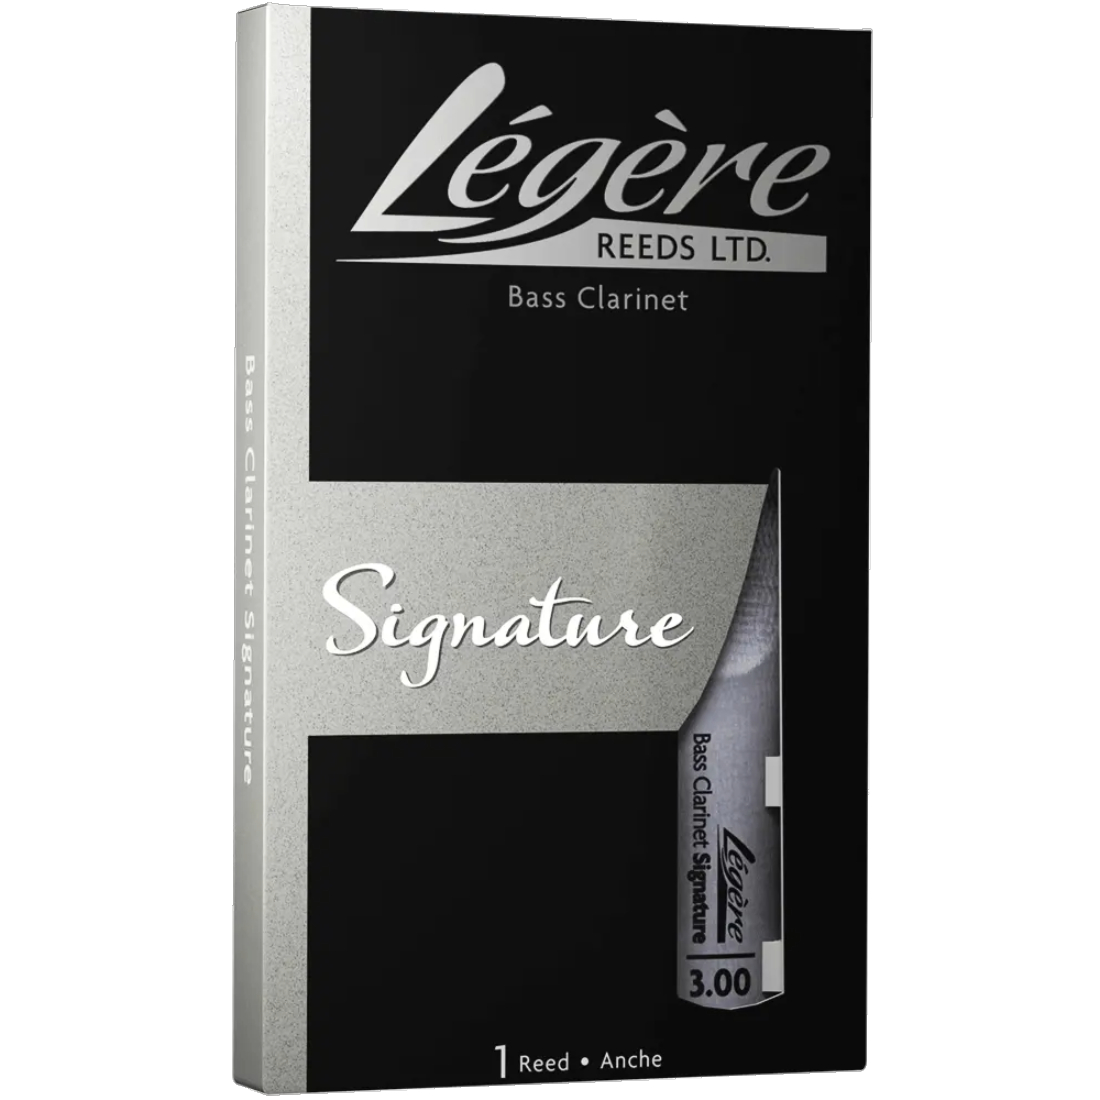 Black and silver box of Legere signature synthetic bass clarinet reeds